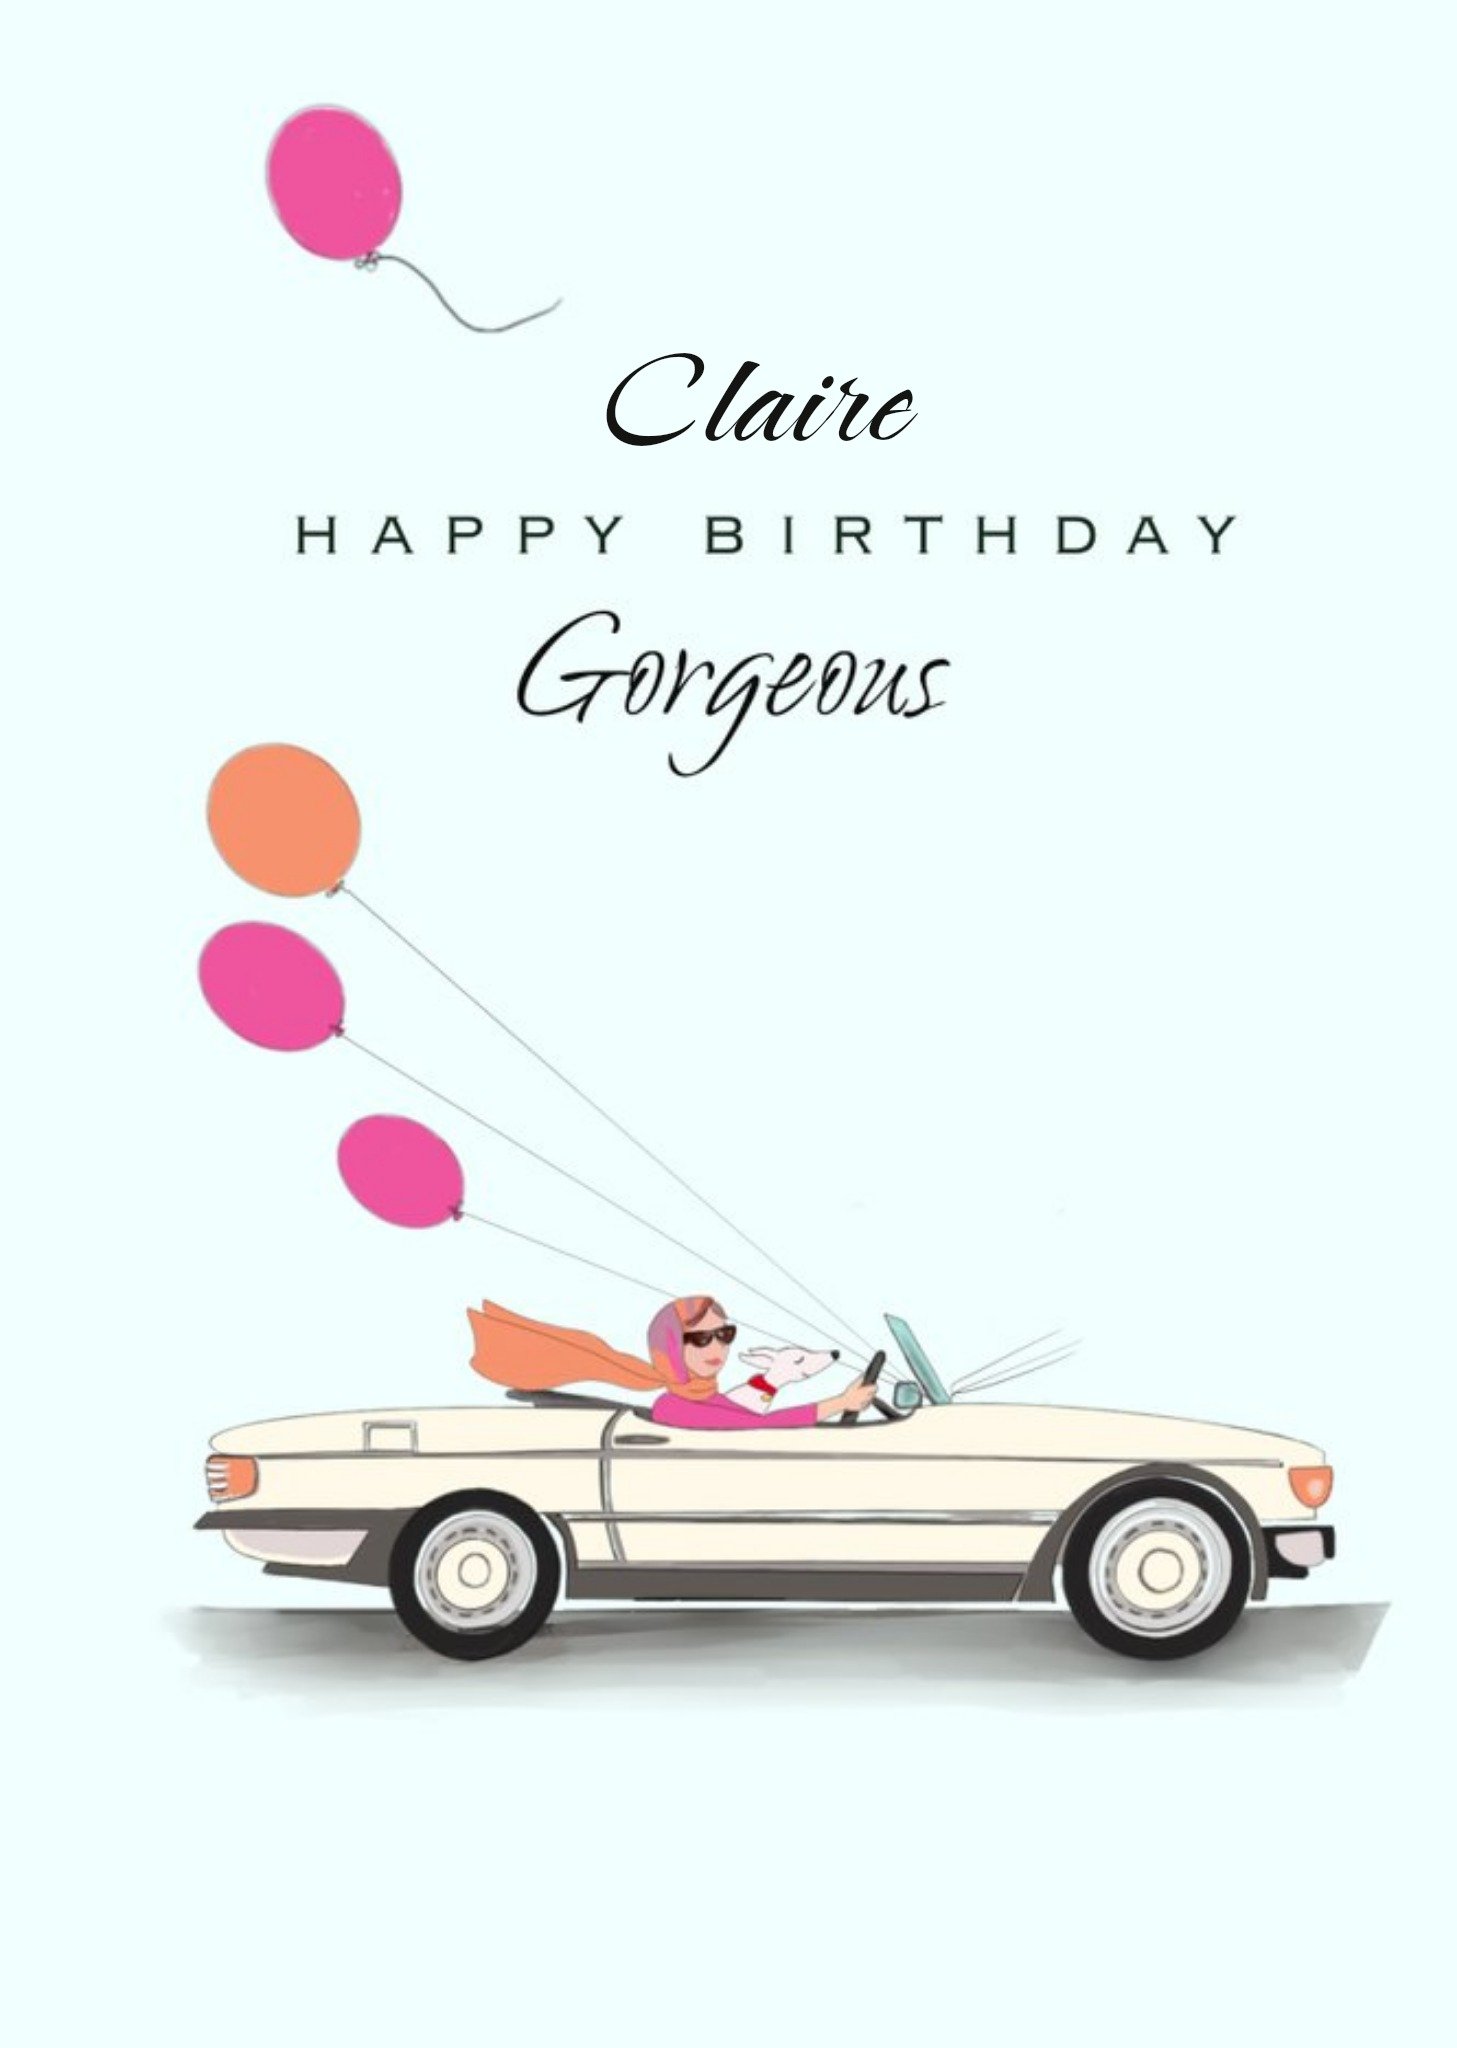 Moonpig Illustrated Convertible Car Driven By A Glamorous Lady Birthday Card Ecard